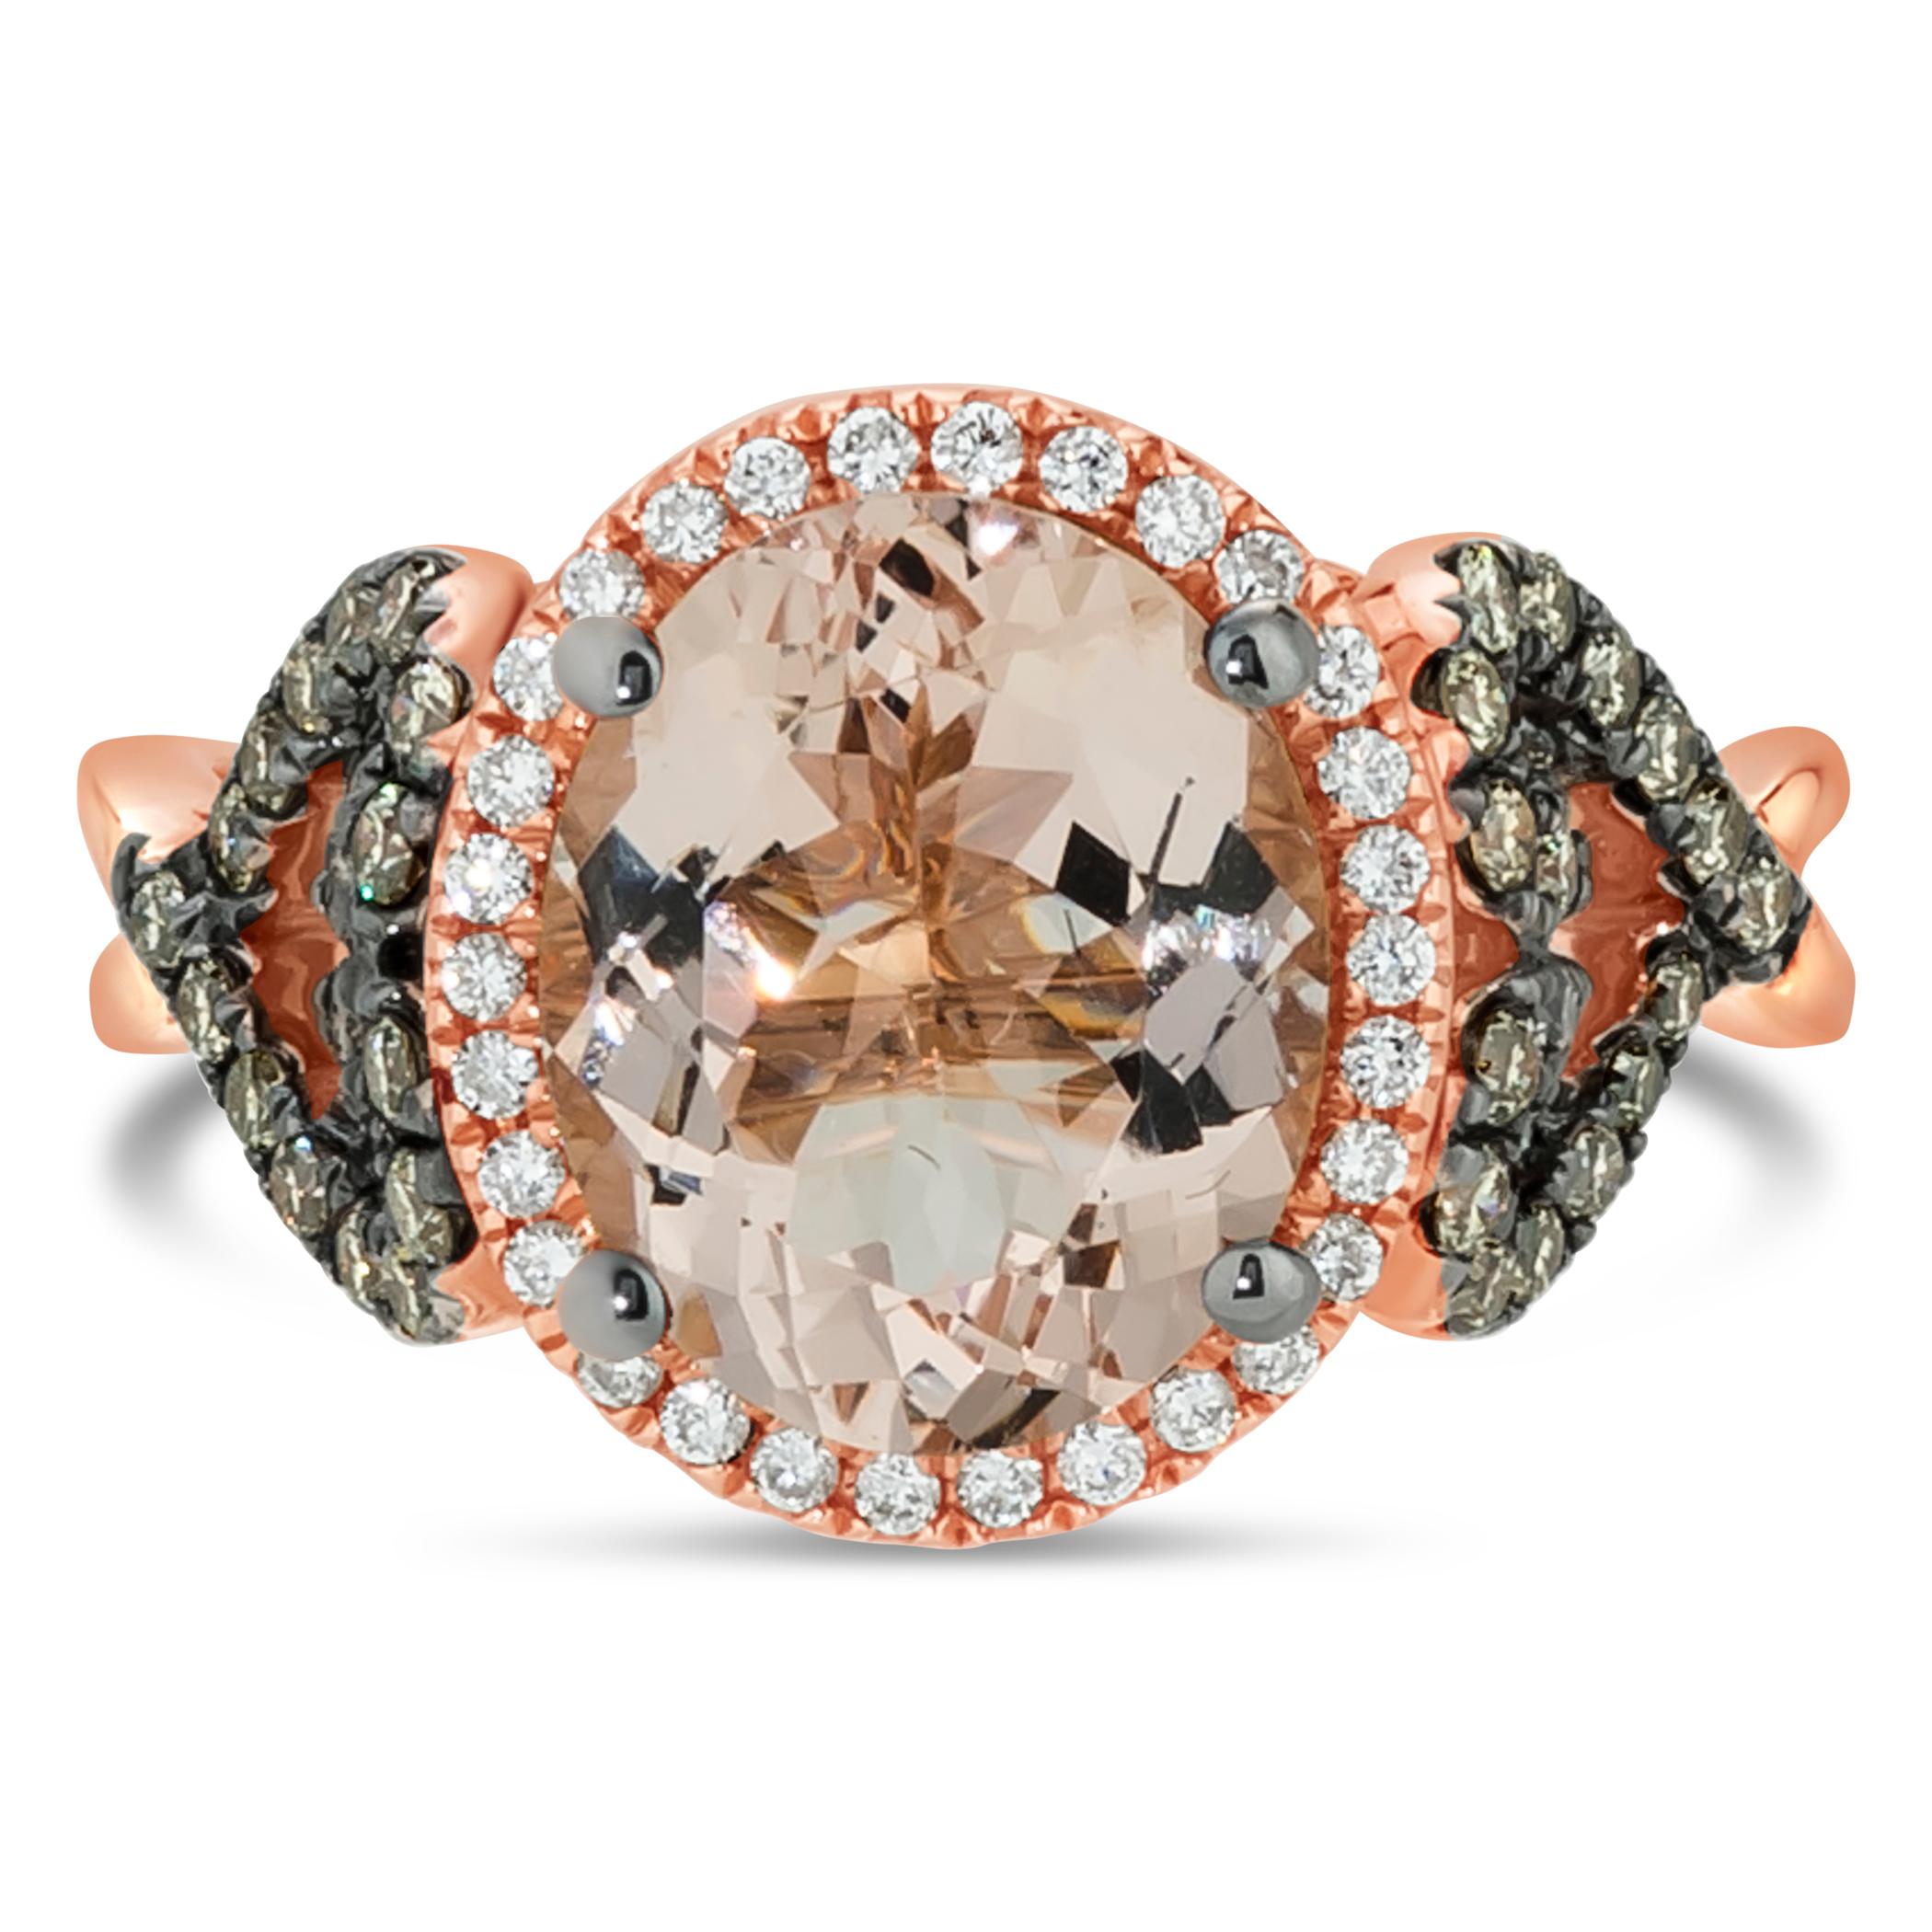 Le Vian Chocolatier® Ring featuring 2  1/2 cts. Peach Morganite™, 3/8 cts. Chocolate Diamonds® , 1/8 cts. Vanilla Diamonds®  set in 14K Strawberry Gold®

The Le Vian Grand Sample Sale is here again with incredible mark-downs! This sophisticated ring